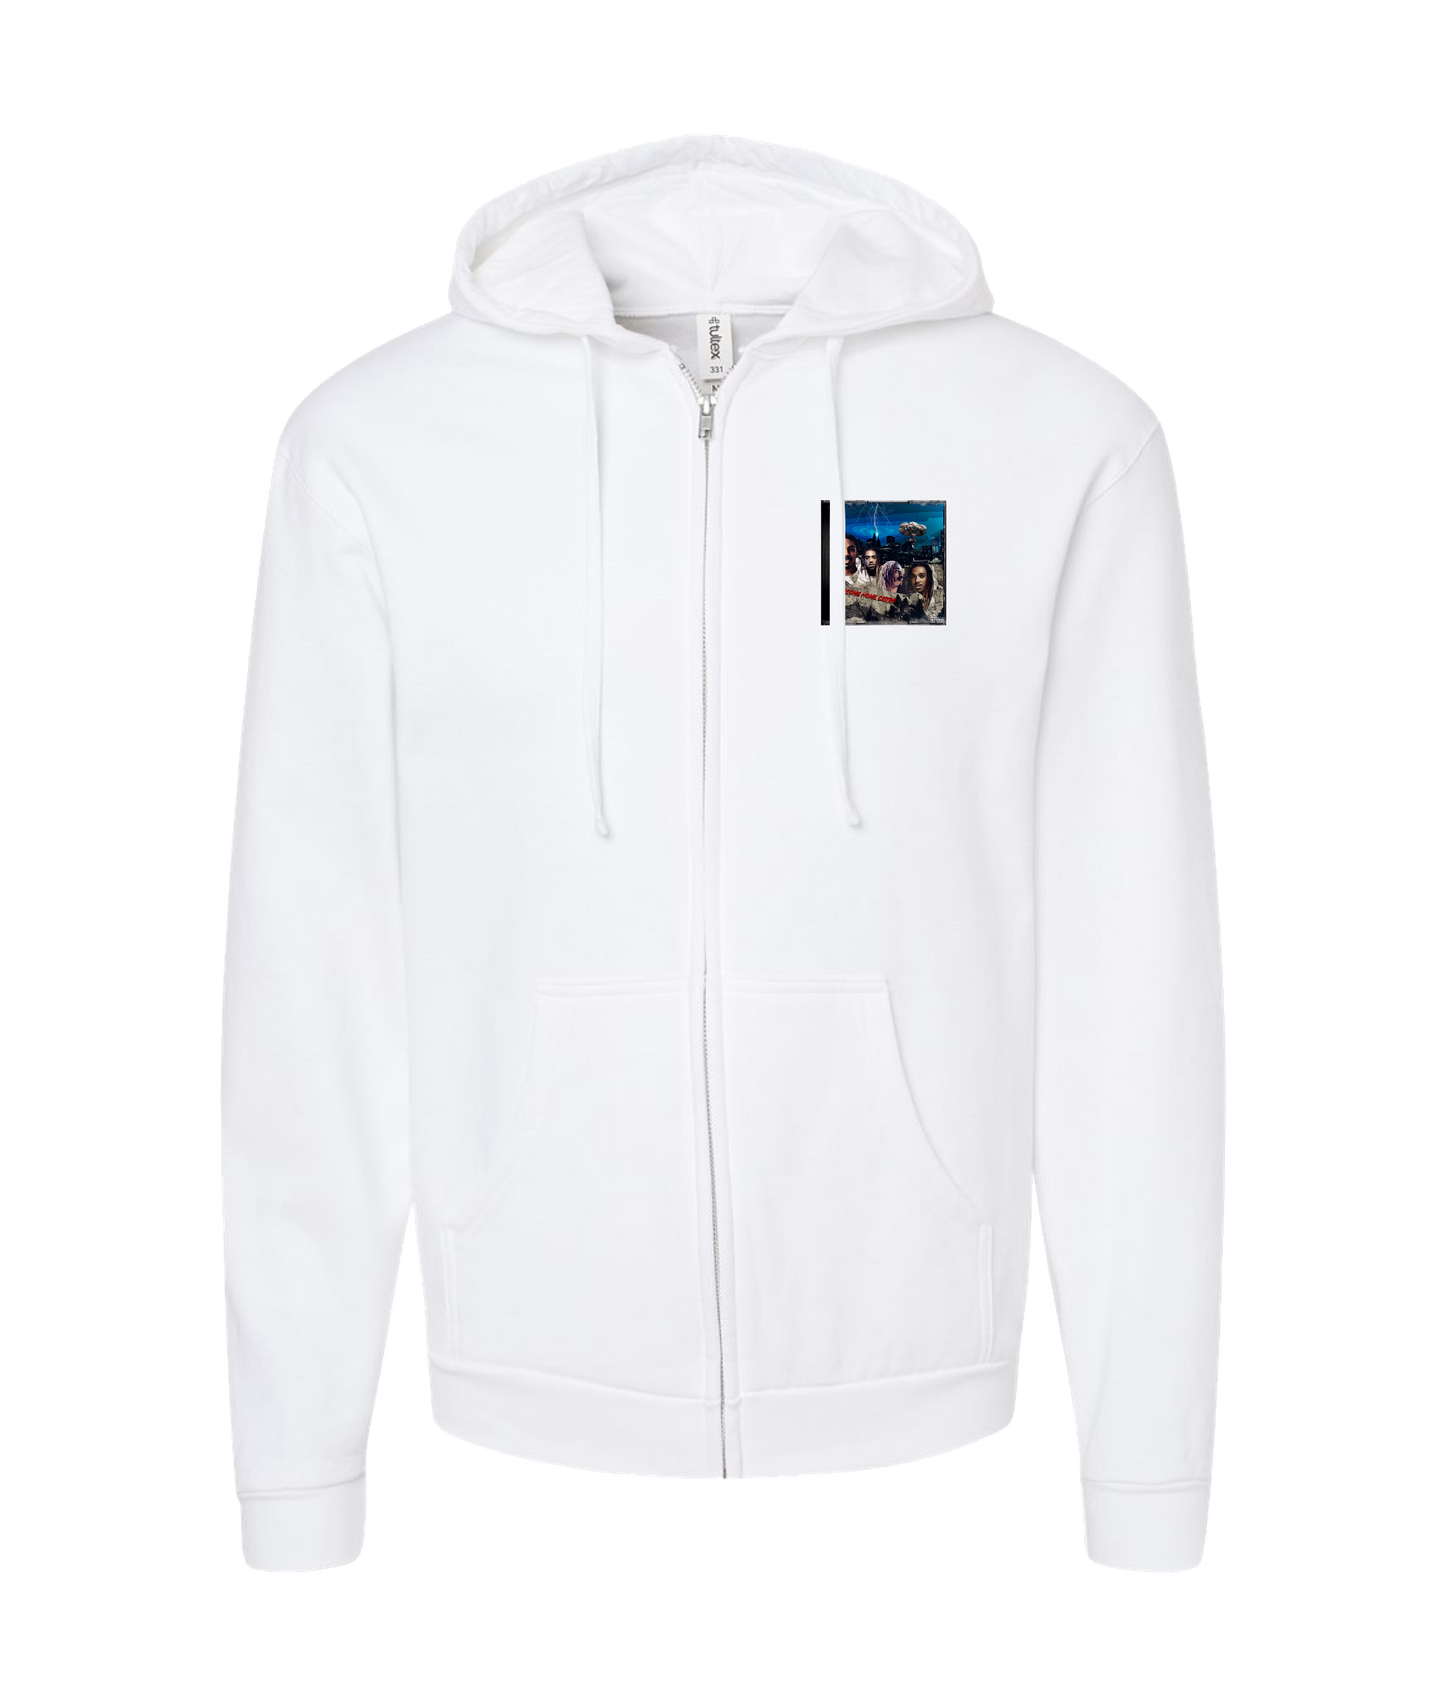 YOUNGCASTRO - Welcome Home Castro - White Zip Up Hoodie